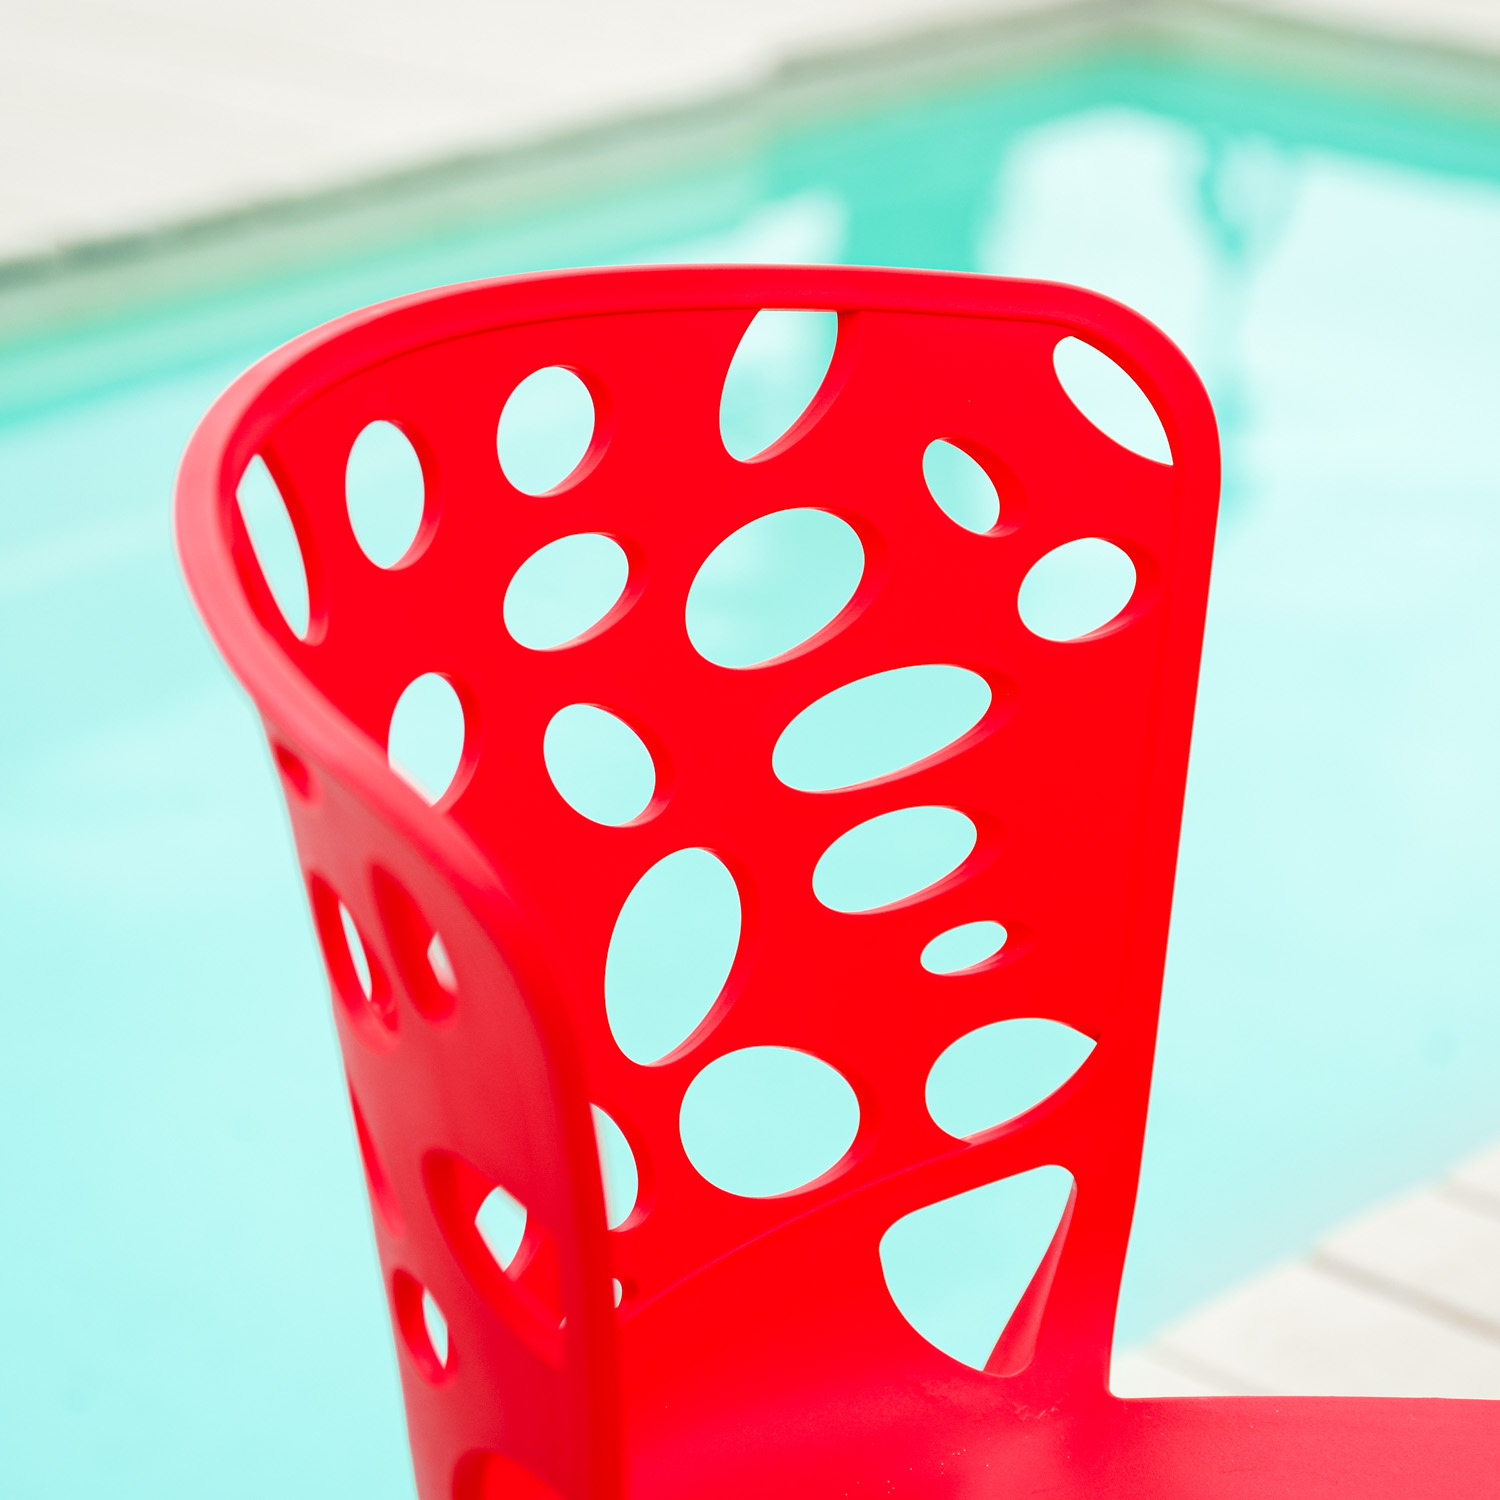 Garden chair Set of 4 Modern Red Camping chairs Outdoor chairs Plastic Stacking chairs Kitchen chairs